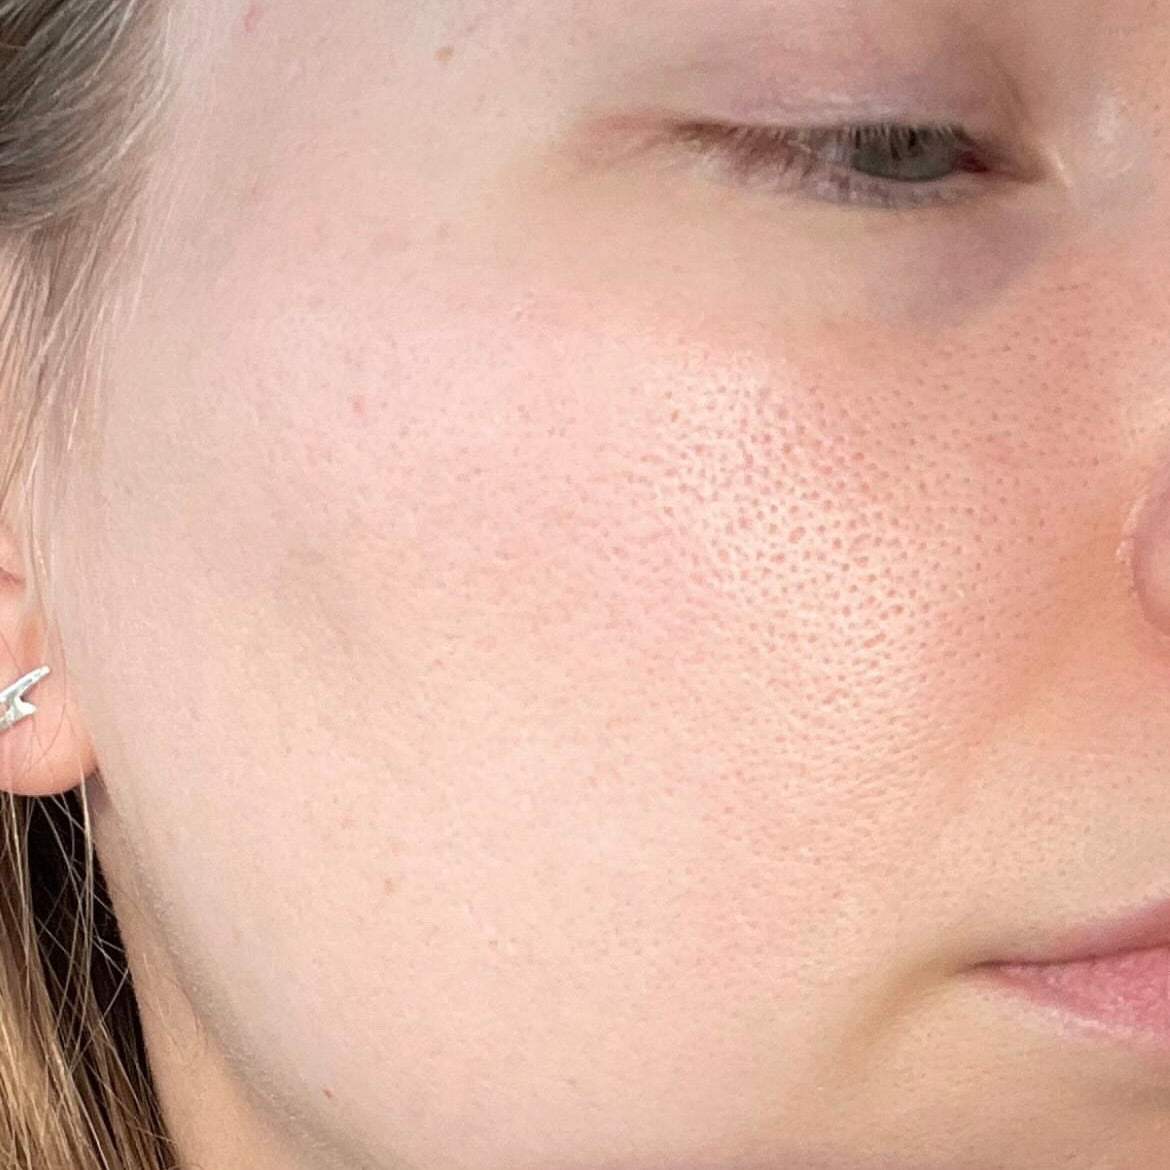 close-up image of a person's face in a after picture to showcase their radiant skin condition after treatment